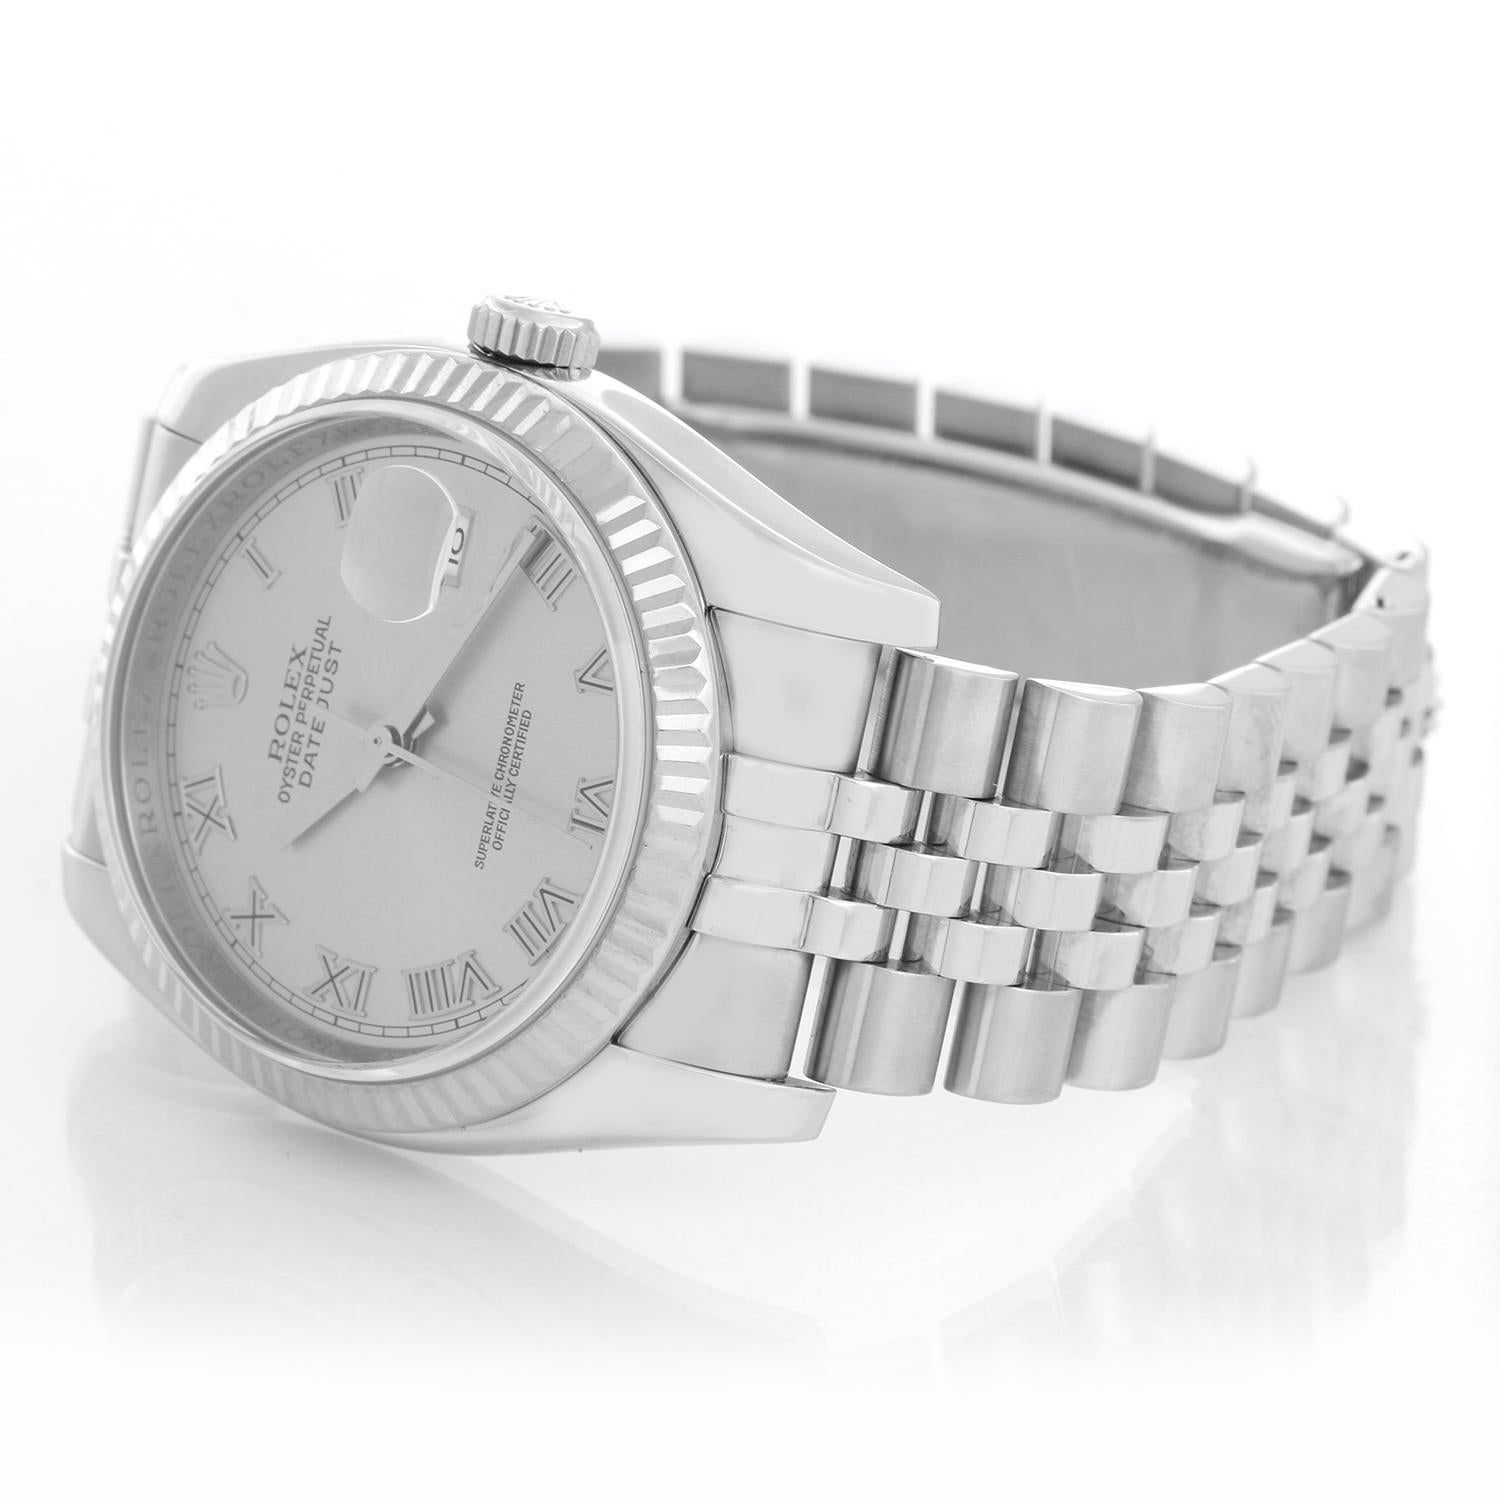 Rolex Datejust Men's Stainless Steel Watch 116234 - Automatic winding, 31 jewels, Quickset, sapphire crystal. Stainless steel case with 18k white gold fluted bezel . Rhodium dial with roman numerals . Stainless steel Jubilee bracelet. Pre-owned with